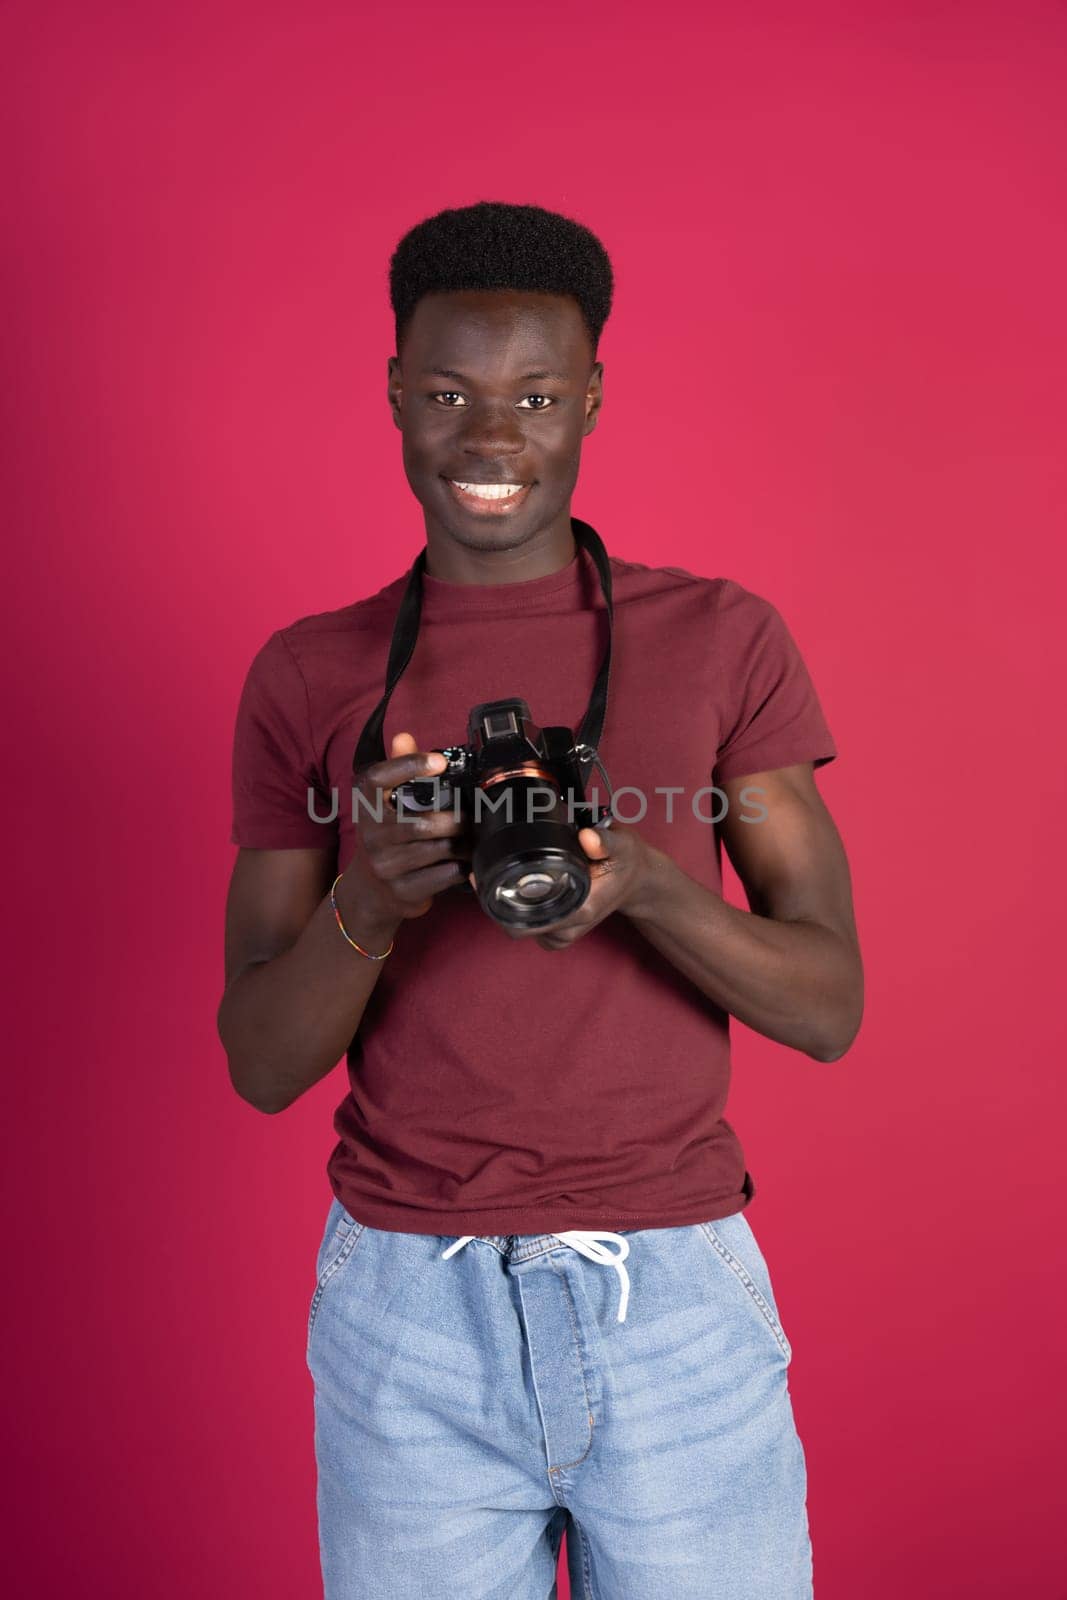 A man with a camera is smiling and holding the camera up to his face. The image has a happy and lighthearted mood, as the man is enjoying himself while taking a photo